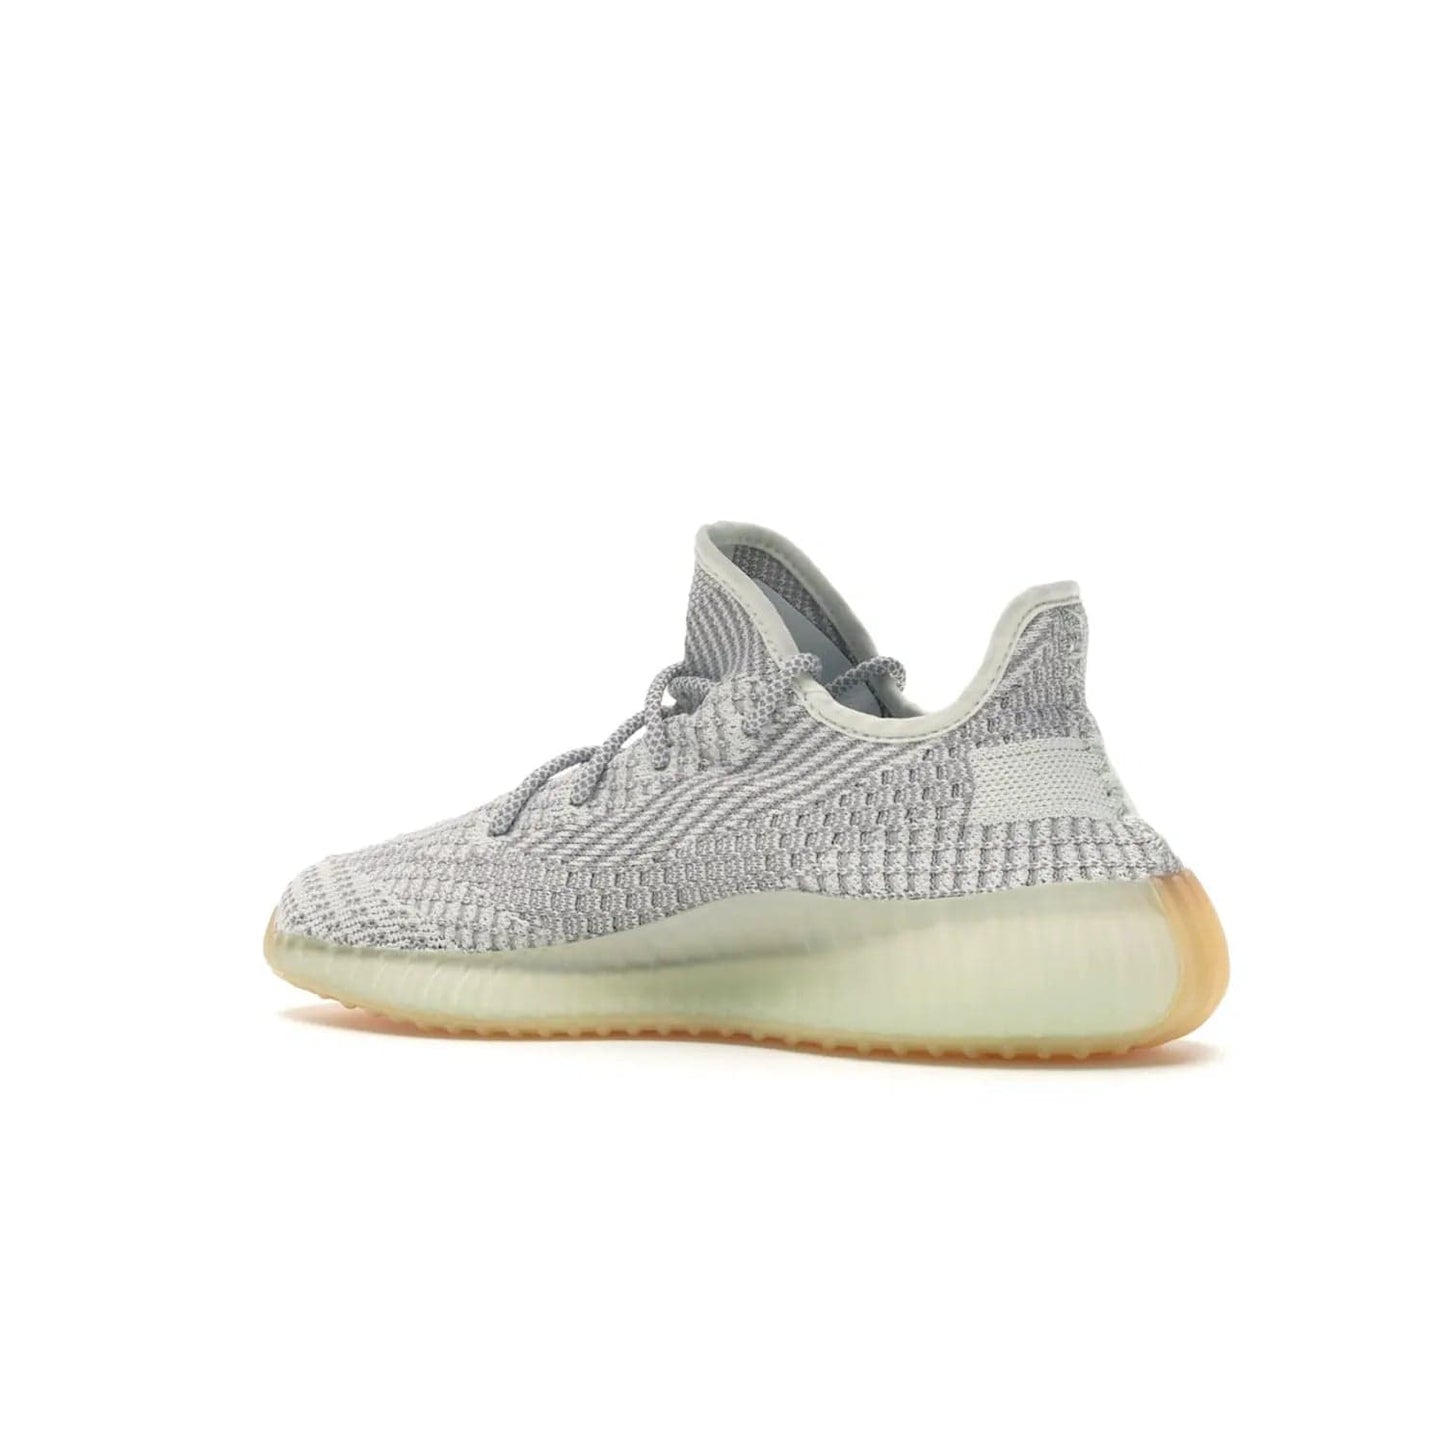 adidas Yeezy Boost 350 V2 Yeshaya (Non-Reflective) - Image 22 - Only at www.BallersClubKickz.com - Step out in style with the adidas Yeezy Boost 350 V2 Yeshaya (Non-Reflective). Gray-and-white Primeknit upper with mesh side stripe & rope laces, plus a translucent Boost sole with a hint of yellow. Make a statement and feel comfortable with this stylish sneaker.